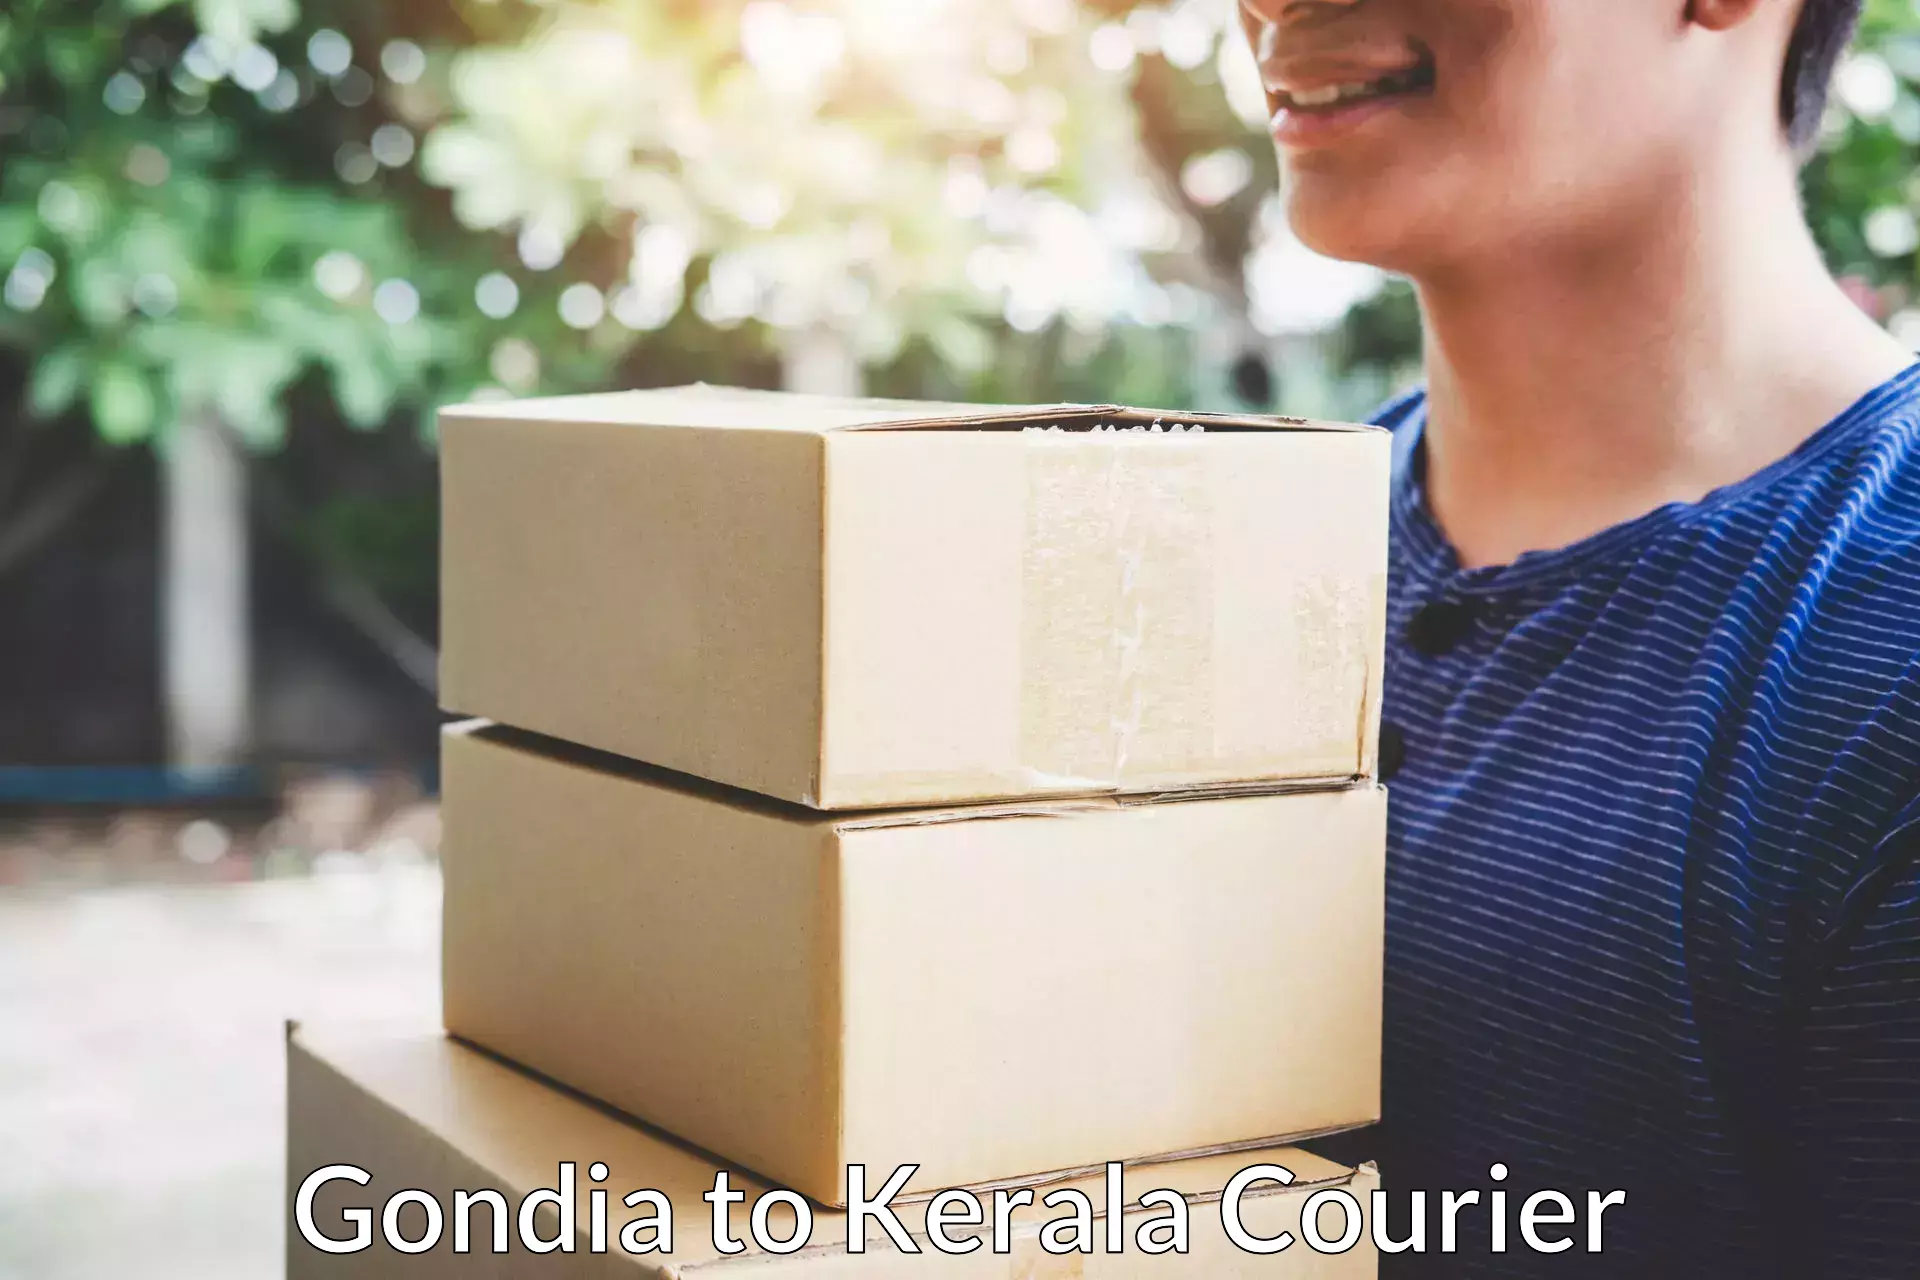 Furniture delivery service Gondia to Angamaly